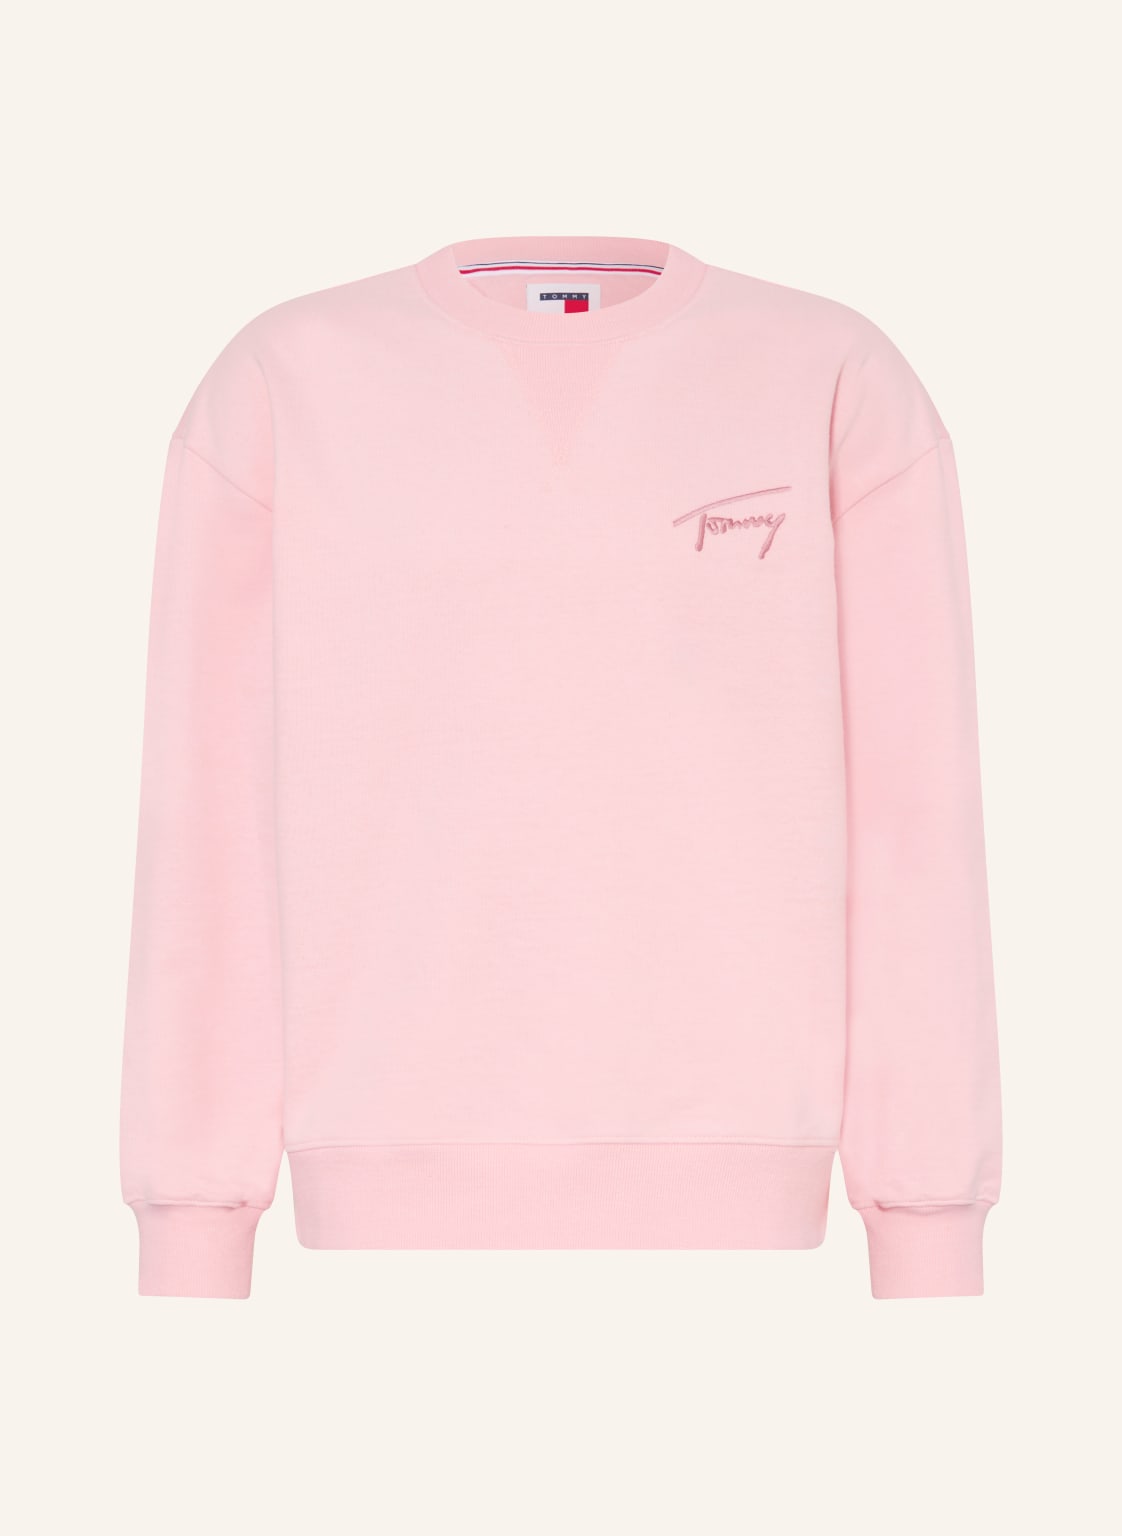 Tommy Jeans Sweatshirt rosa von Tommy Jeans